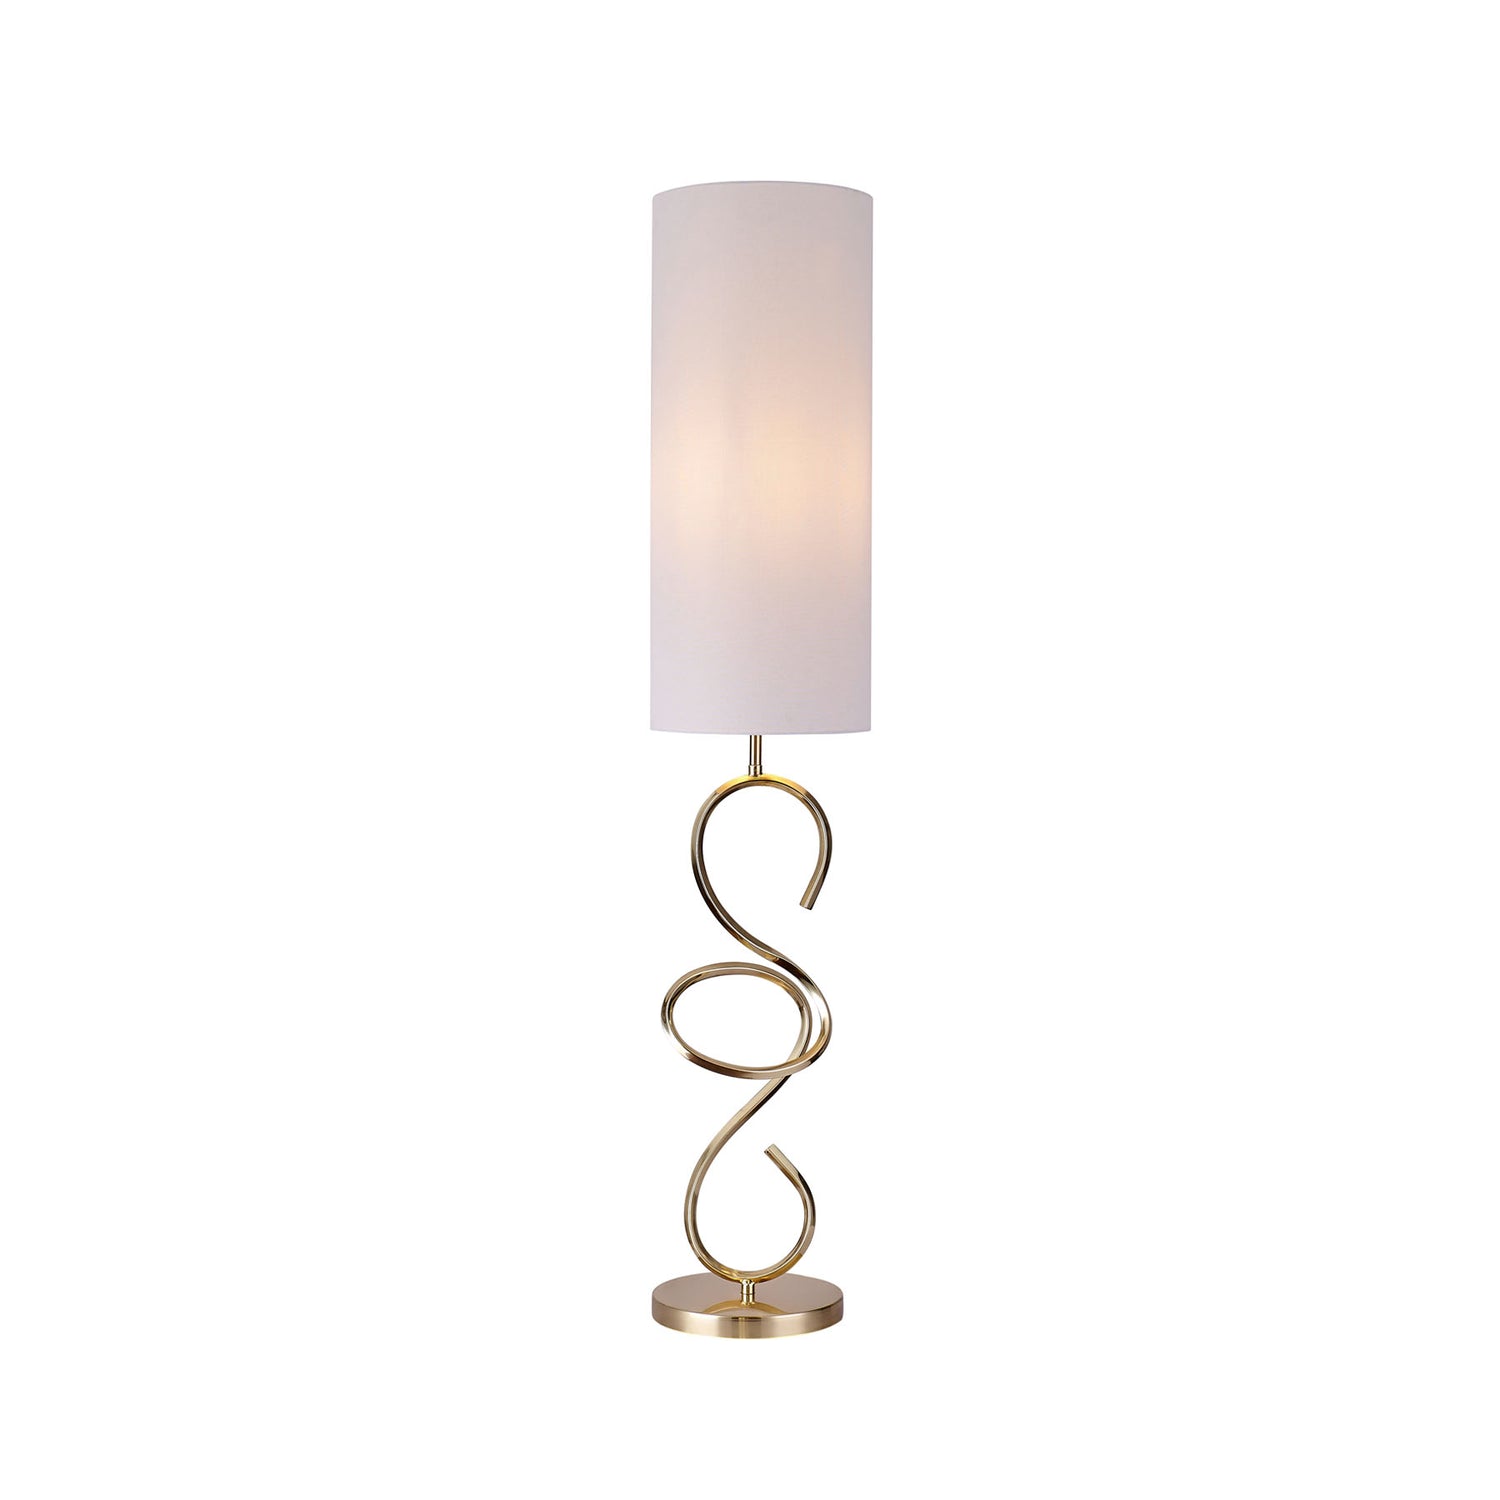 Zola Brass and White Contemporary Floor Lamp